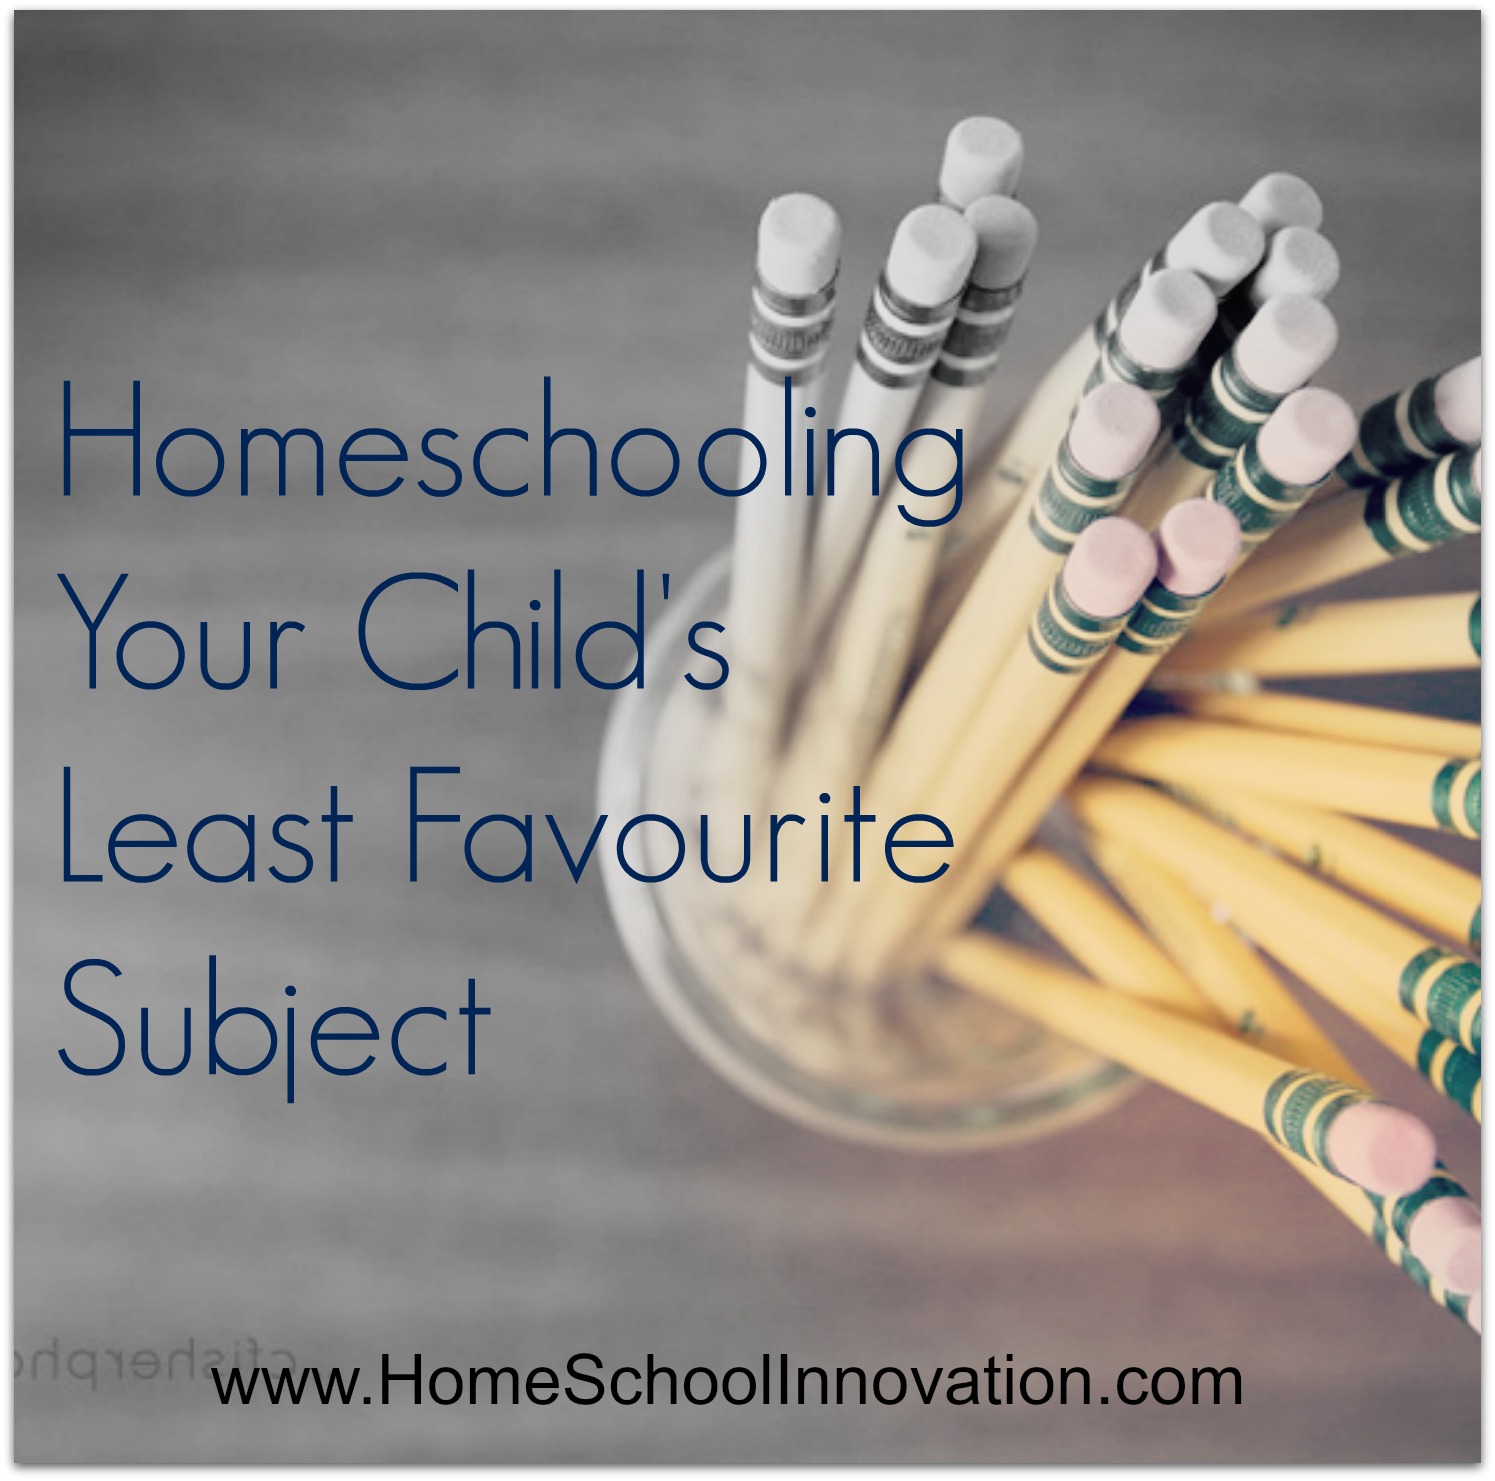 Homeschooling Your Child’s Least Favourite Subject